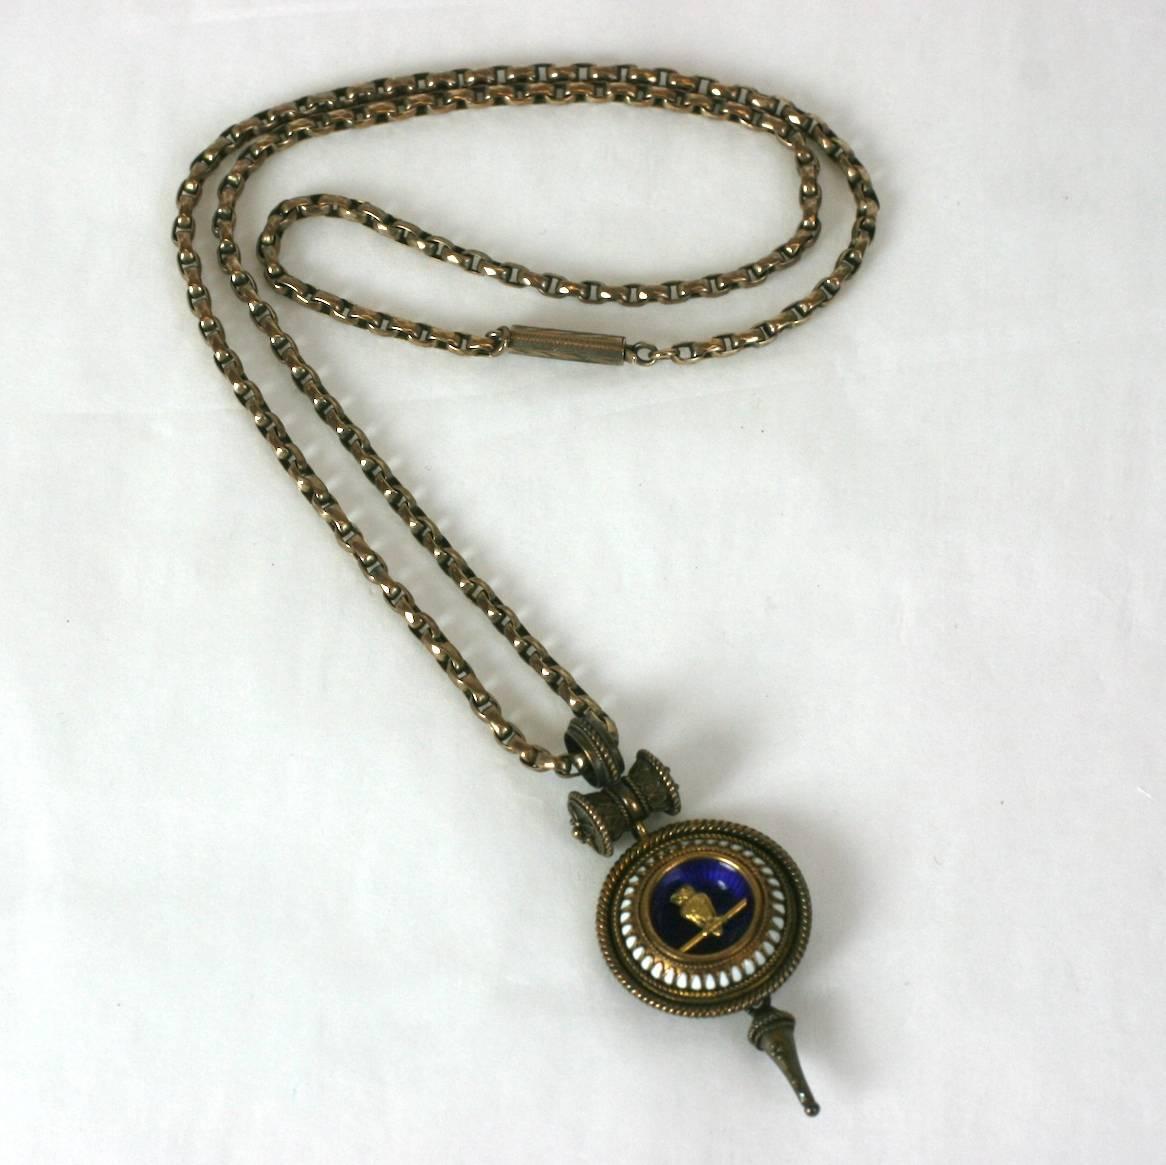 Charming Victorian Revivalist Owl Necklace from the late 19th Century. Charming owl motif which signified knowledge and wisdom, rendered as a beautifully detailed gold bird on branch within a blue enameled cup, bordered with white enamel and